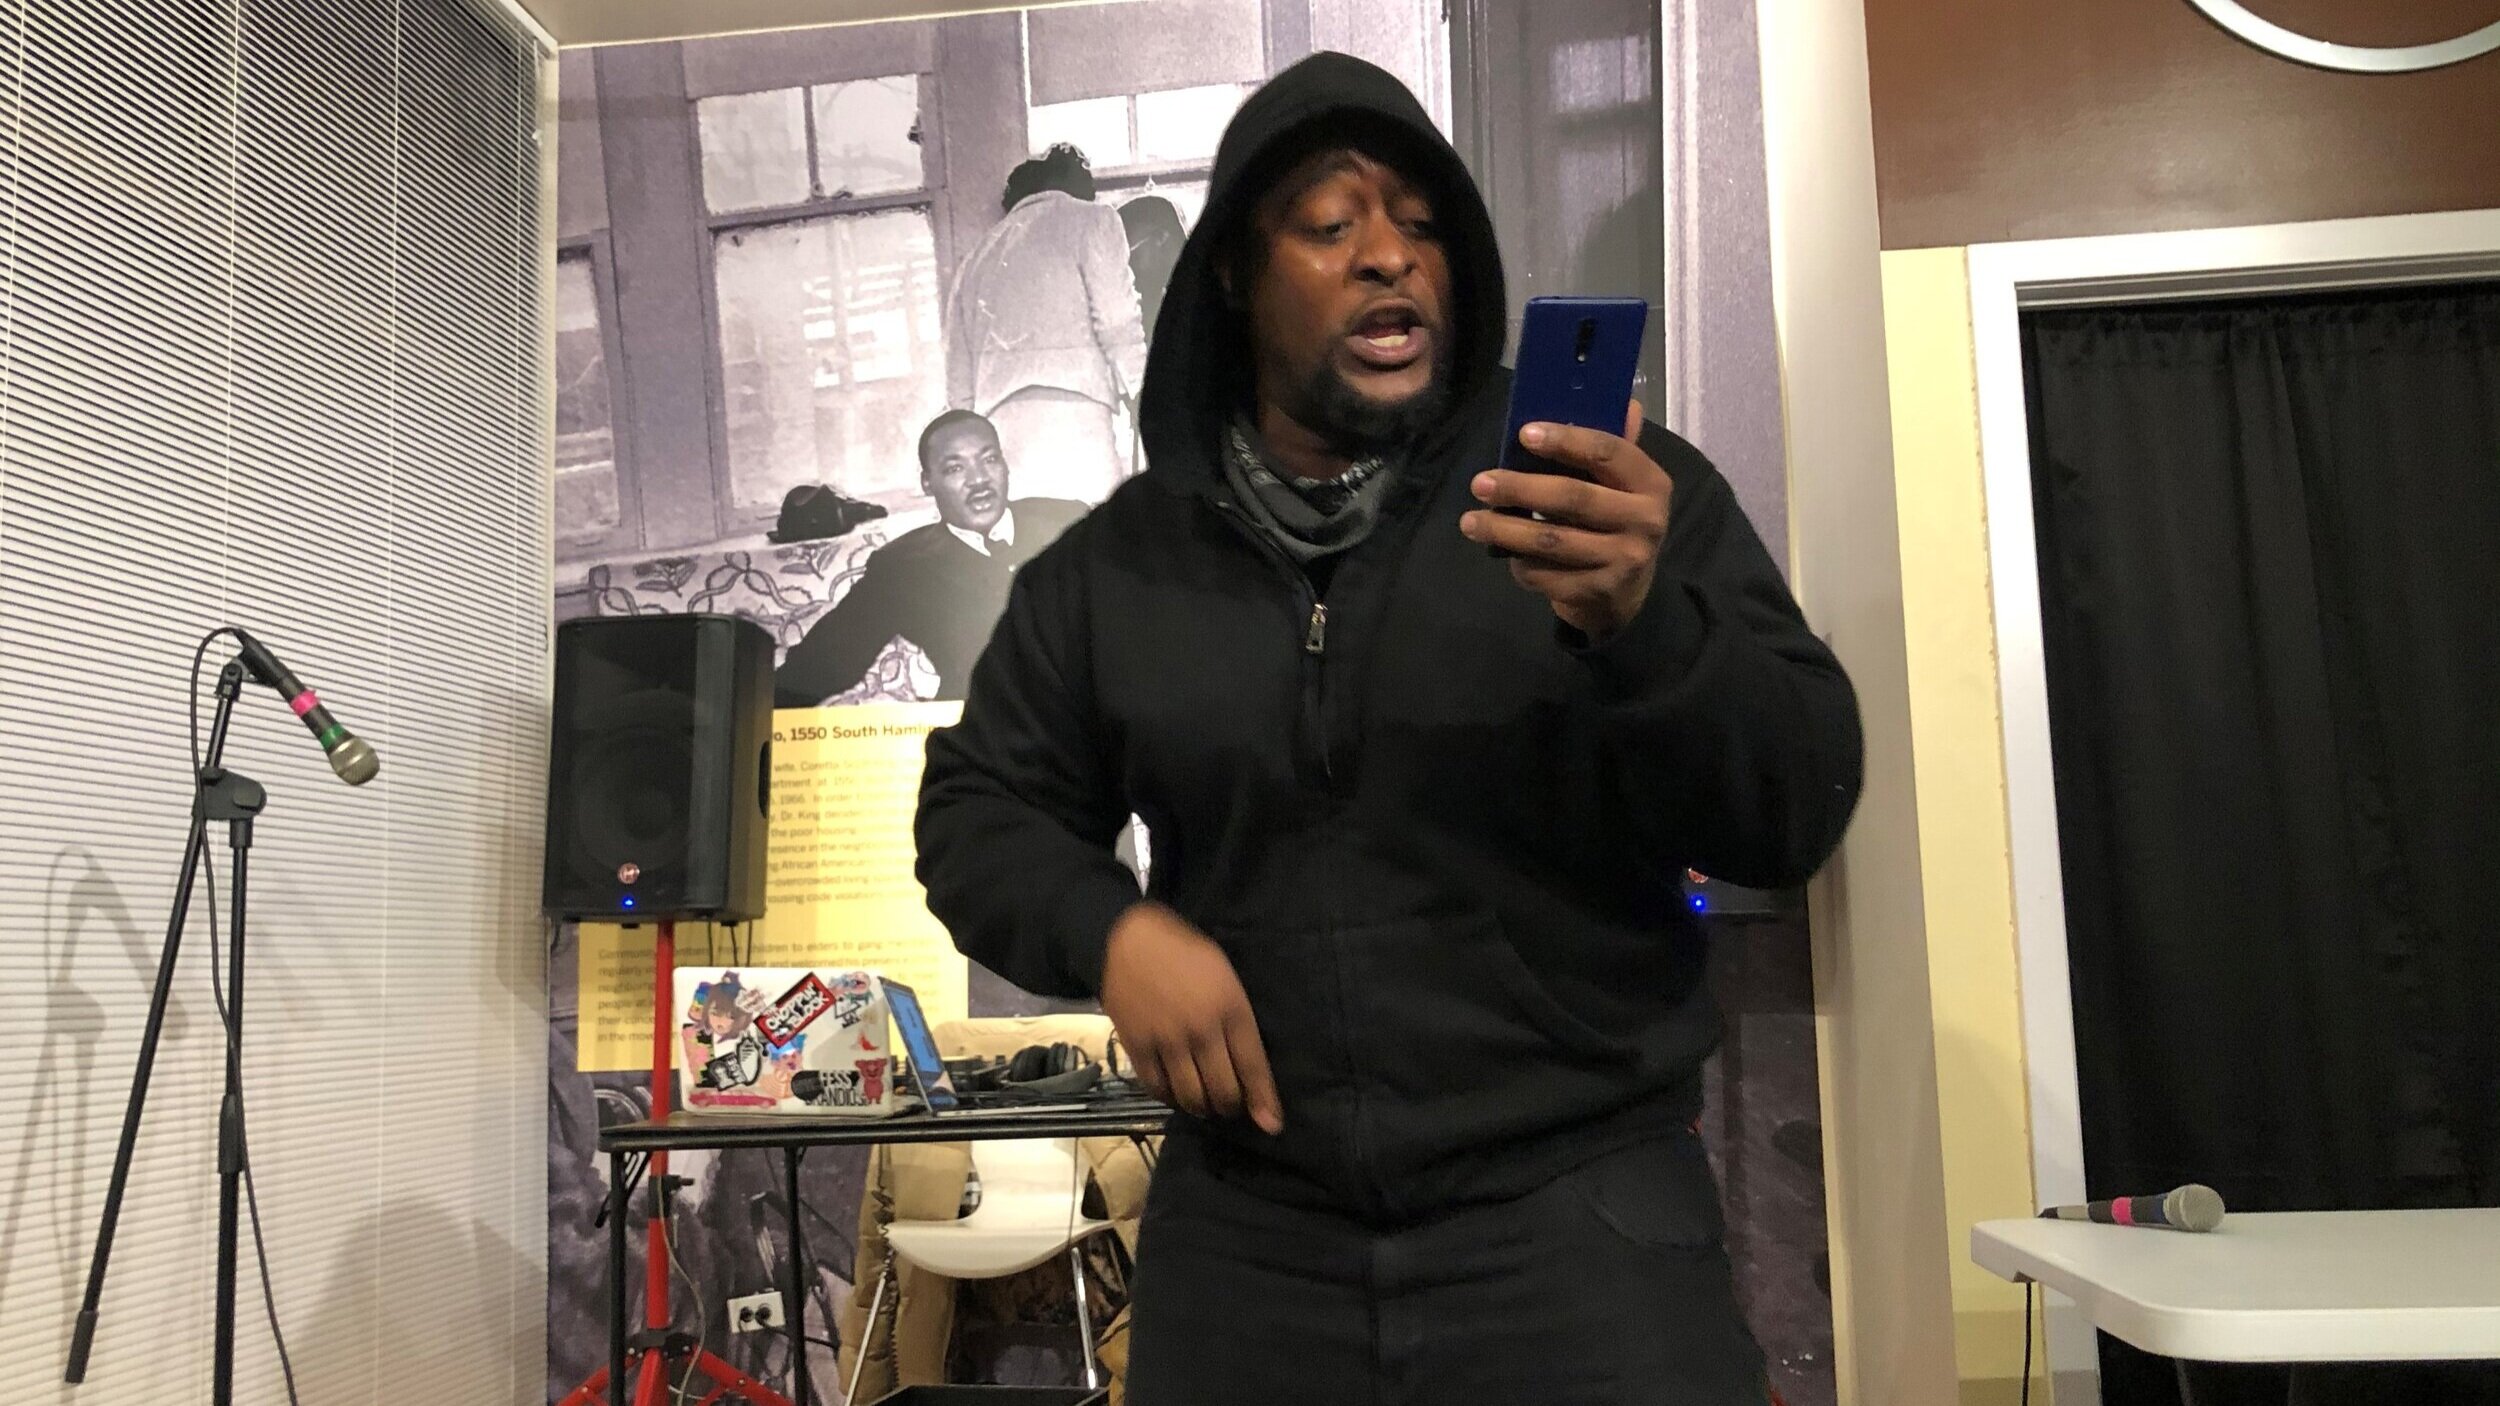   Wdot Ill, co-host and rapper, performed two heartfelt pieces: both focused on learning, building generational wealth, black excellence, investing, and staying away from bad influences.